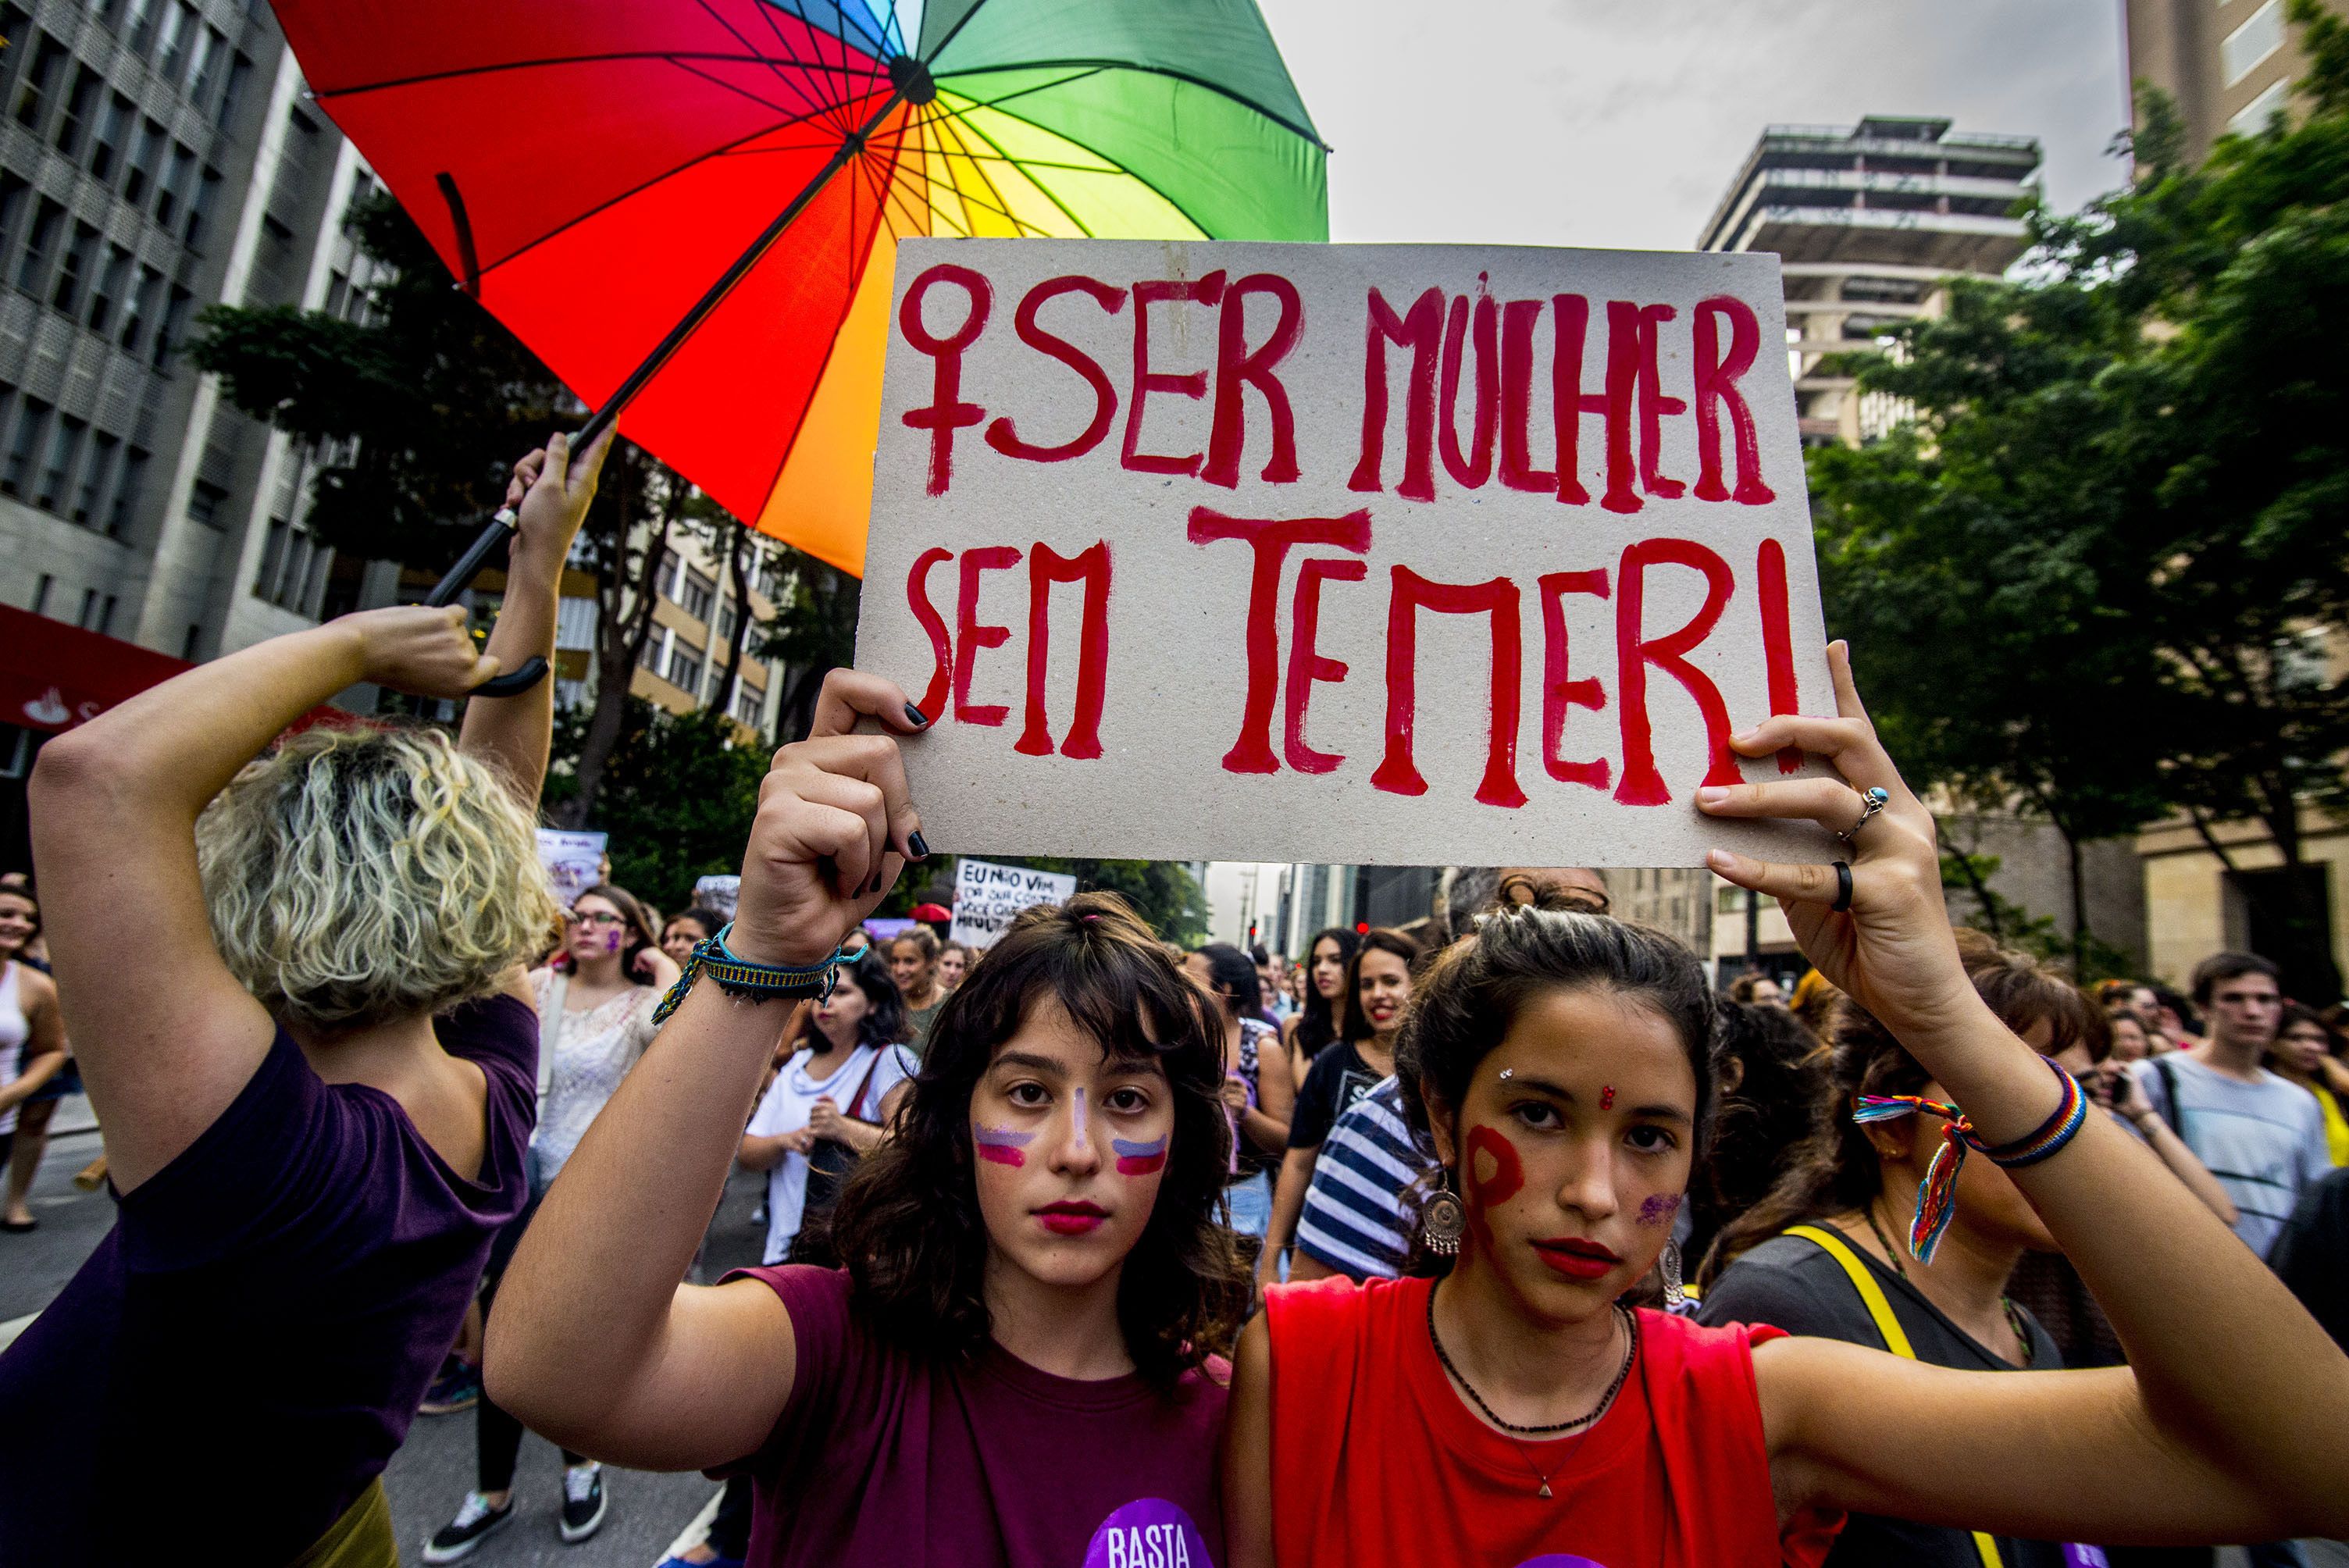 Two women march side by side wearing red and holding a sign in Portuguese that says "be a woman without fear"